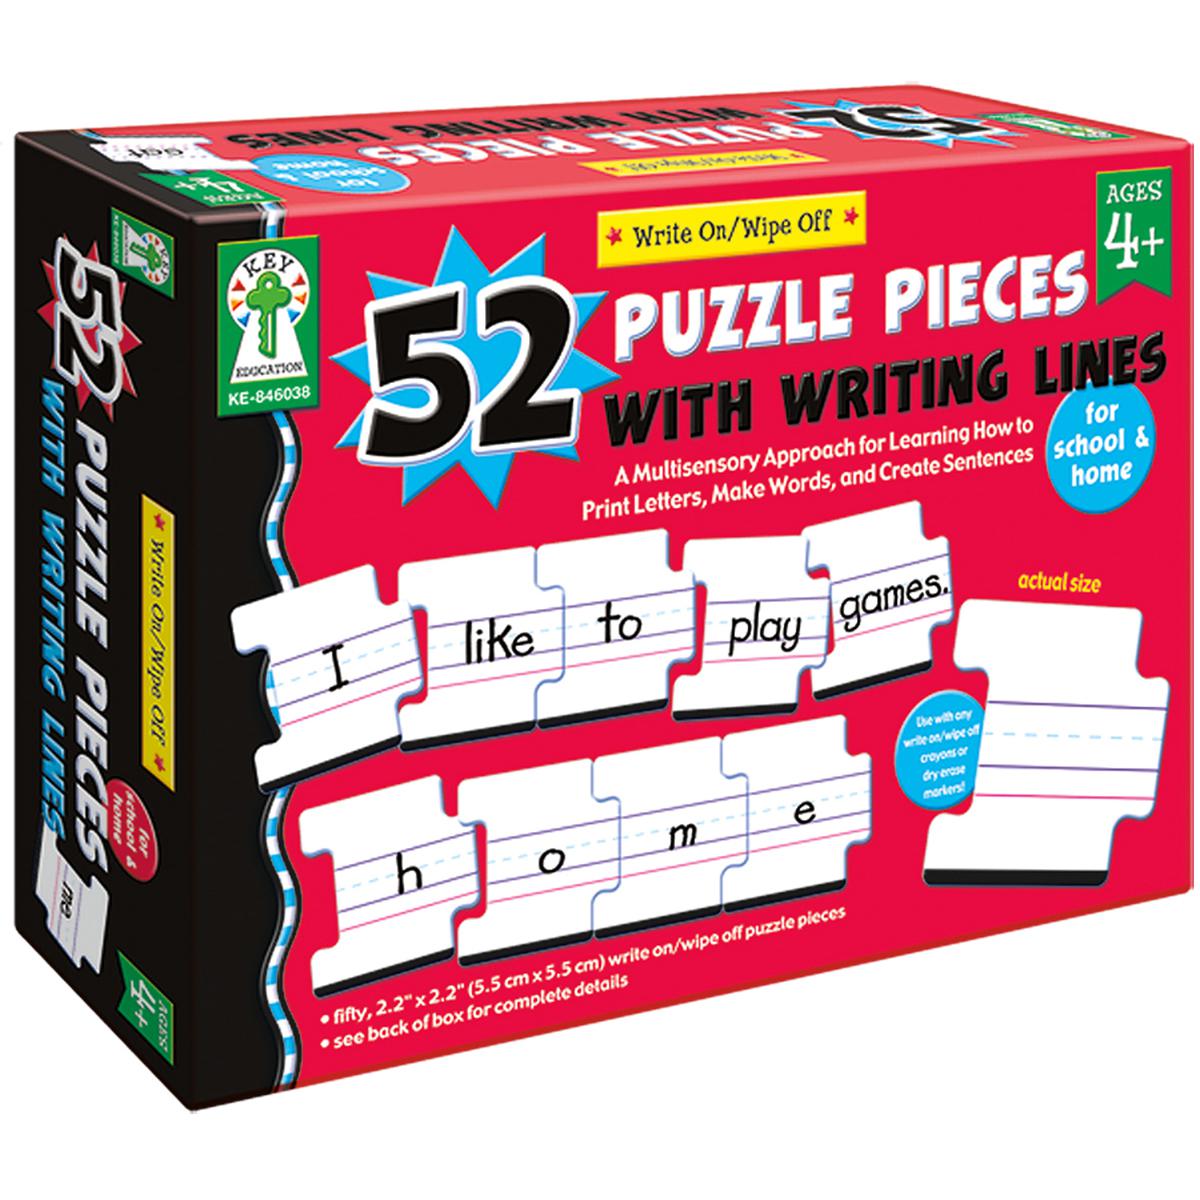  Write-on/Wipe-Off: 52 Puzzle Pieces with Writing Lines 